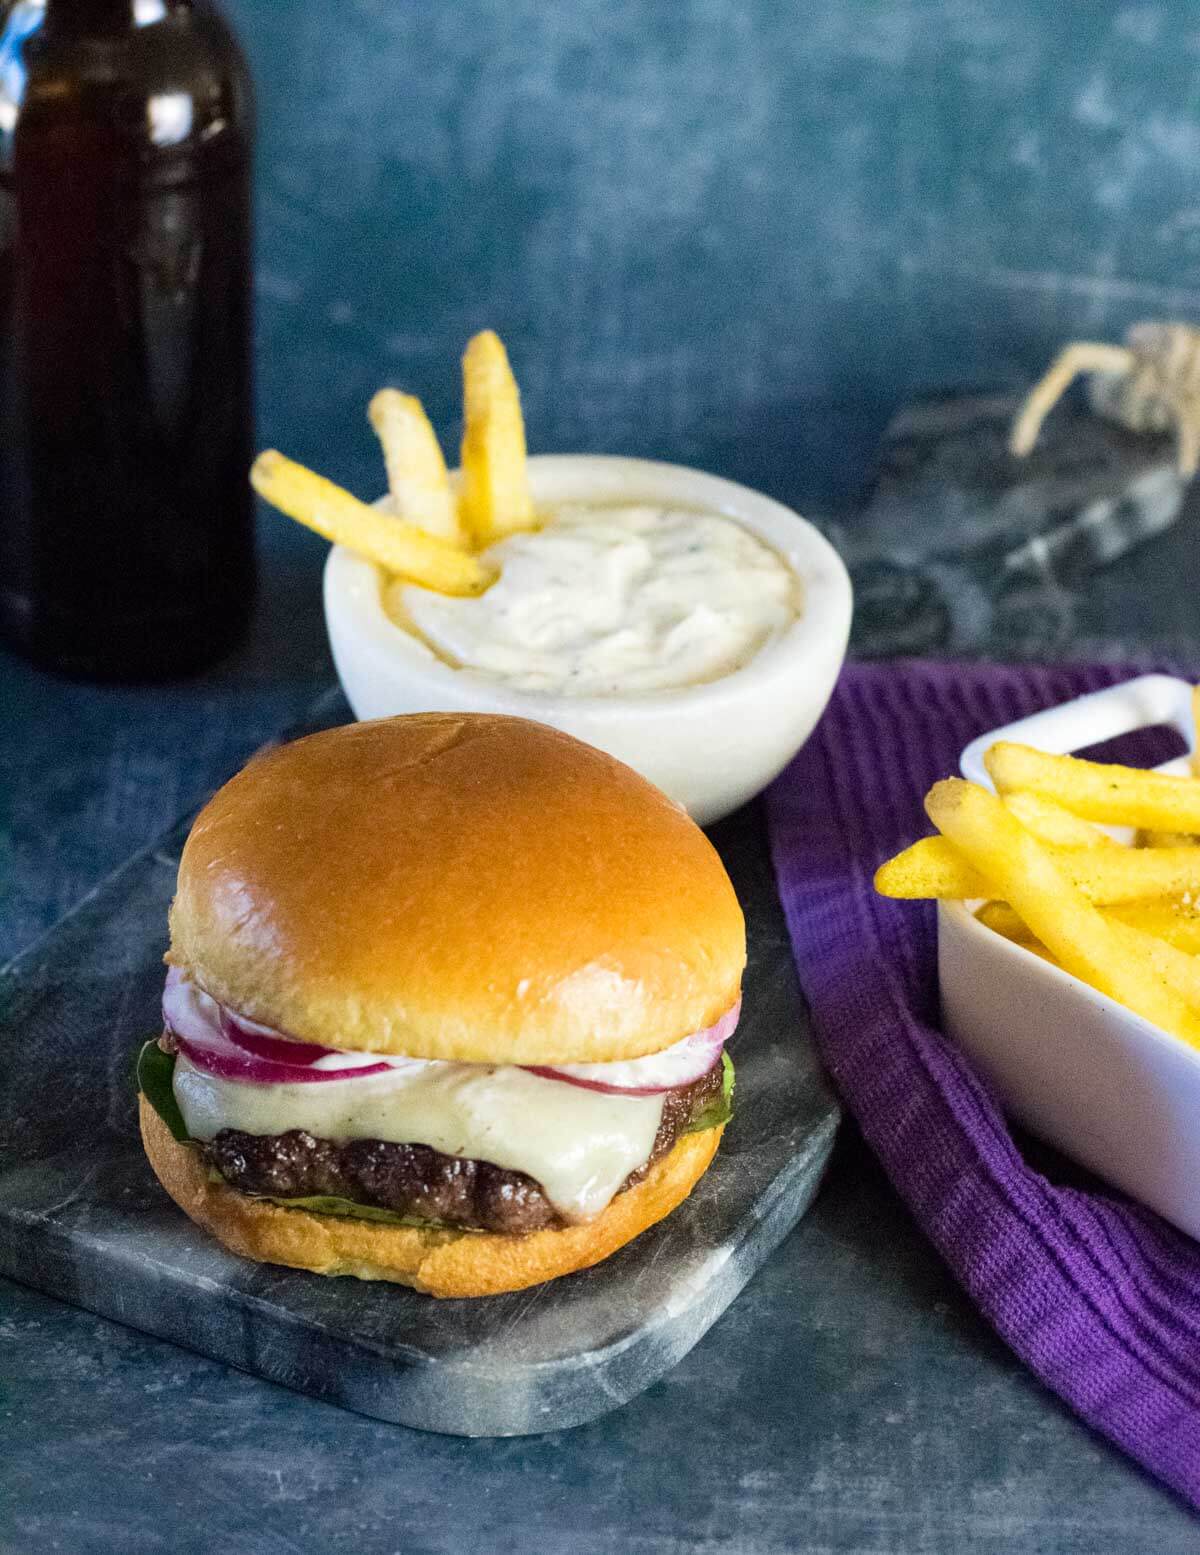 Serving homemade truffle burger with fries.